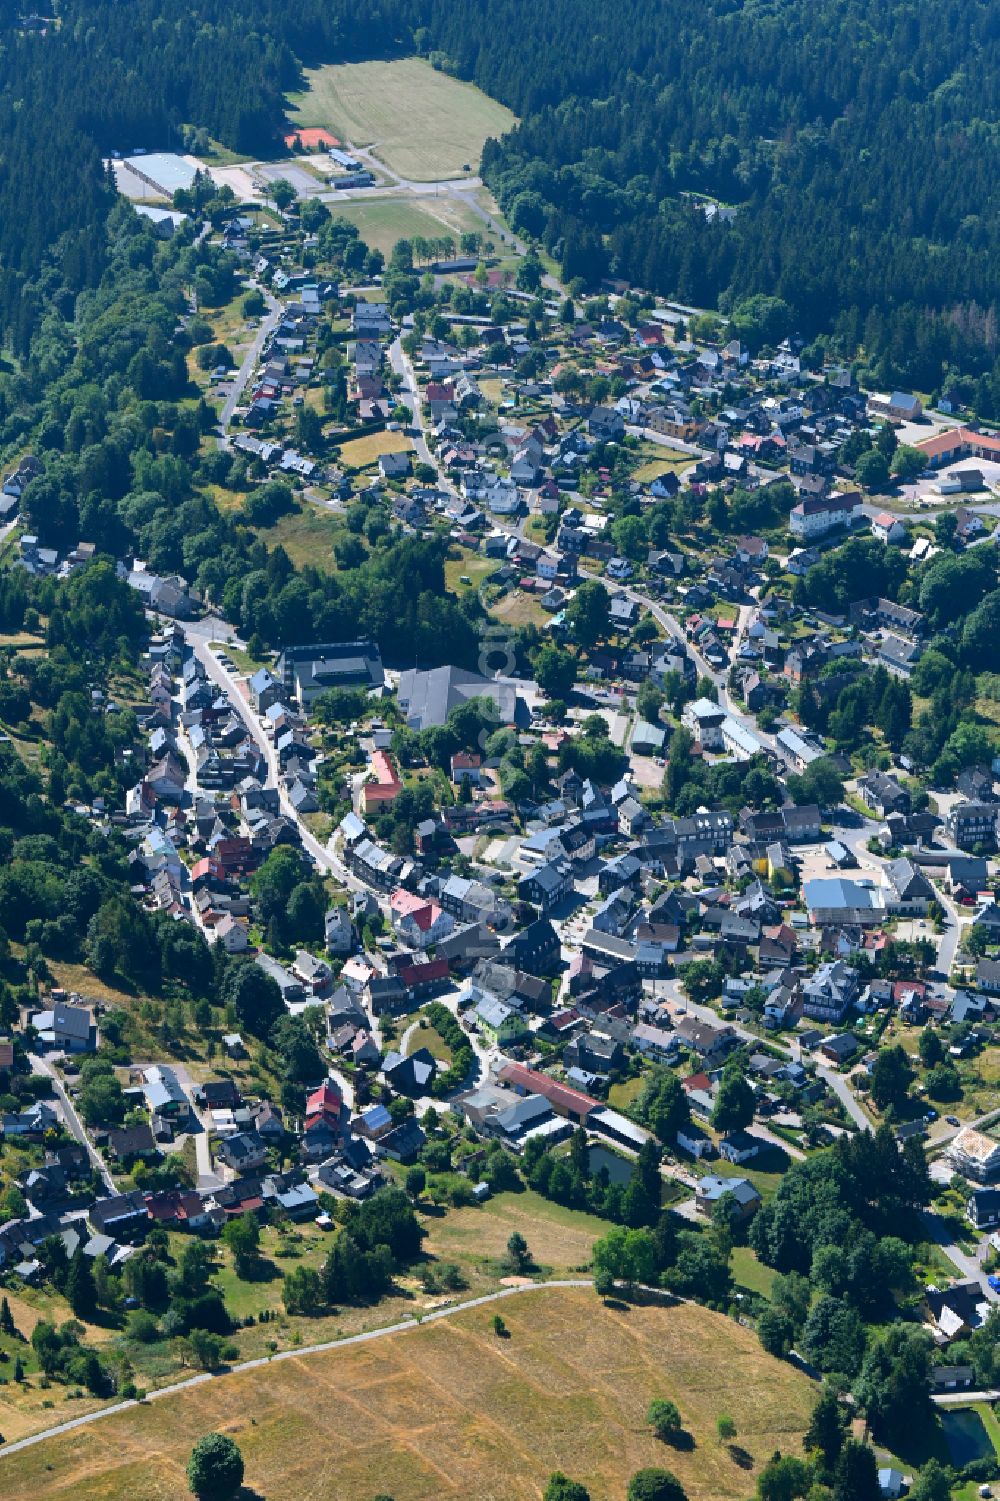 Schmiedefeld am Rennsteig from the bird's eye view: Surrounded by forest and forest areas center of the streets and houses and residential areas in Schmiedefeld am Rennsteig in the state Thuringia, Germany